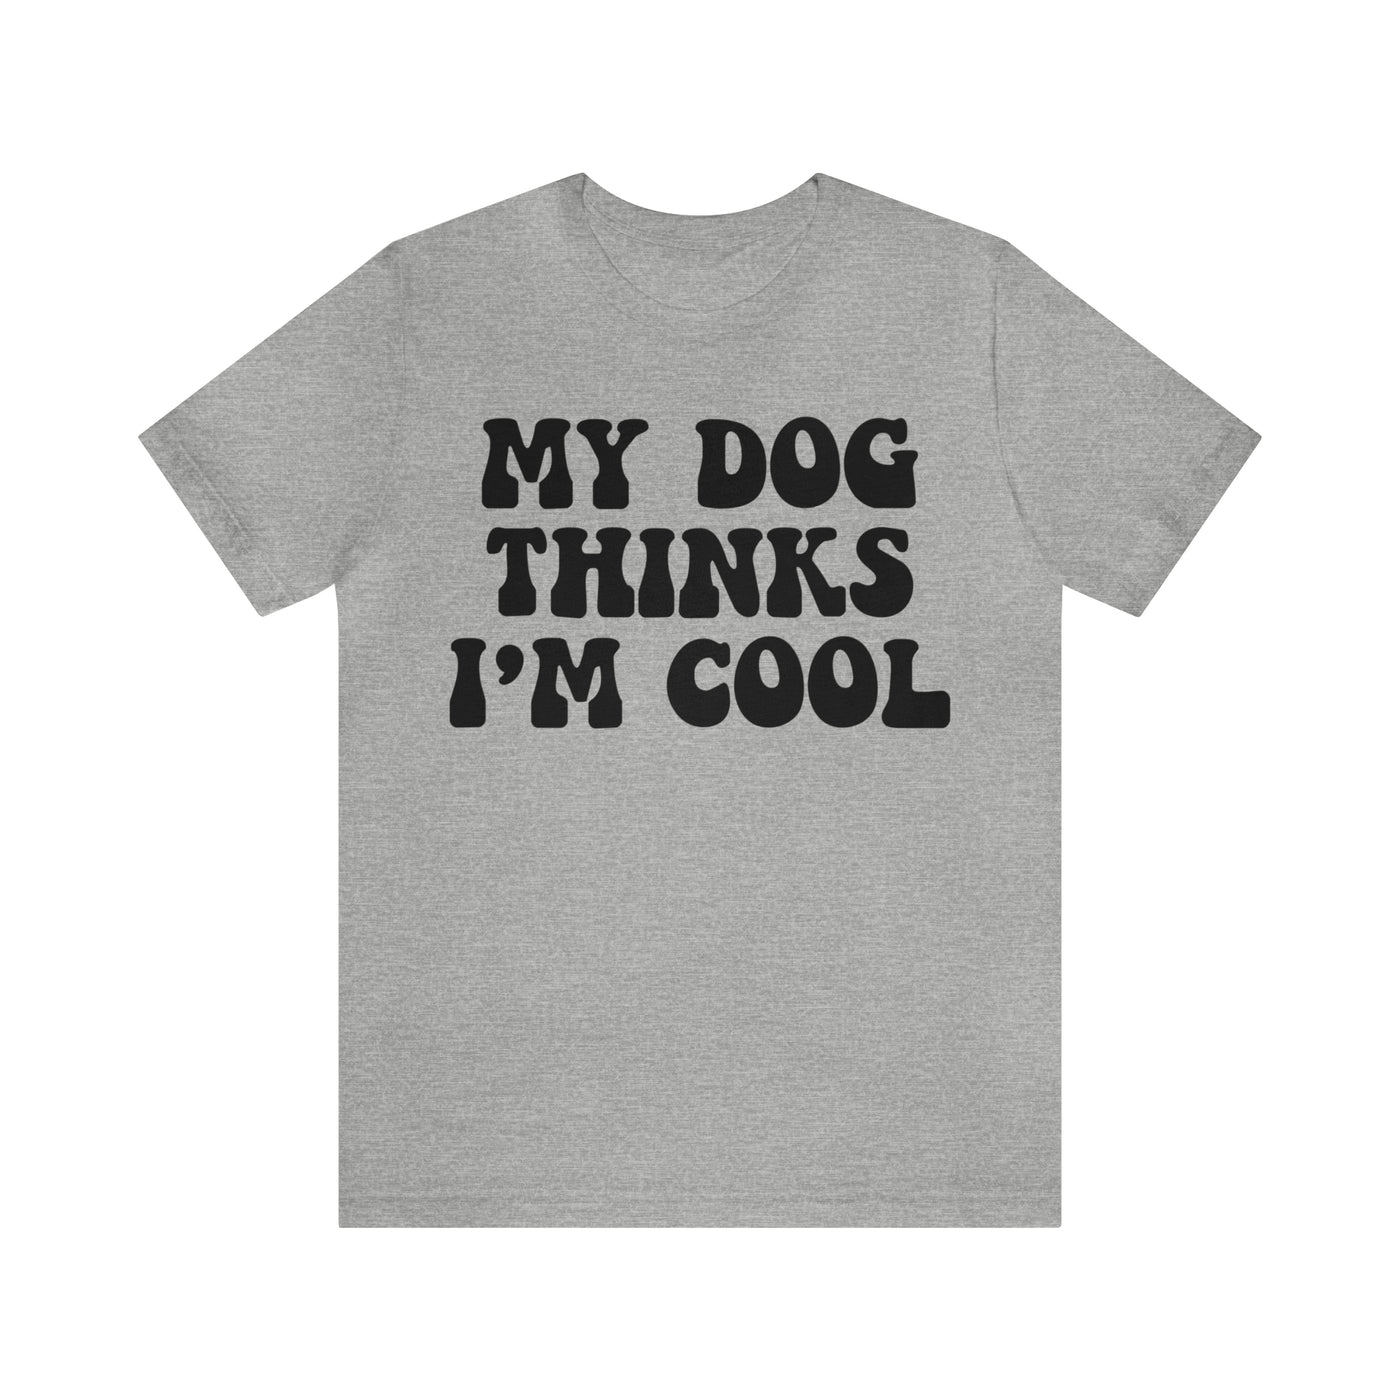 My Dog Thinks I'm Cool T-Shirt (Assorted Colors)